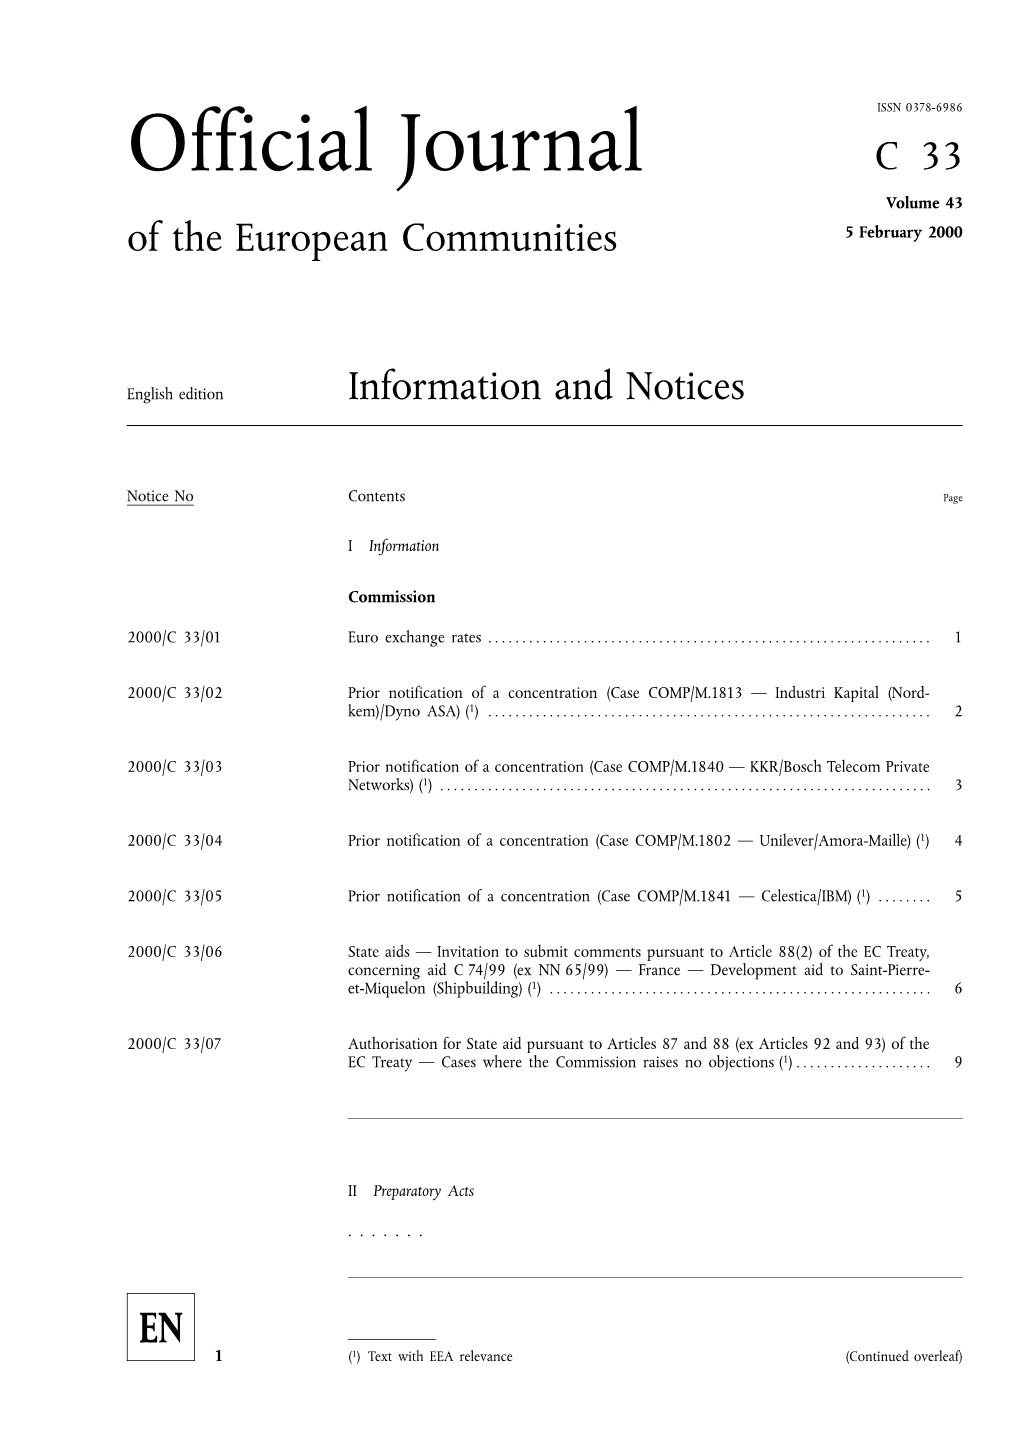 Official Journal C33 Volume 43 of the European Communities 5 February 2000